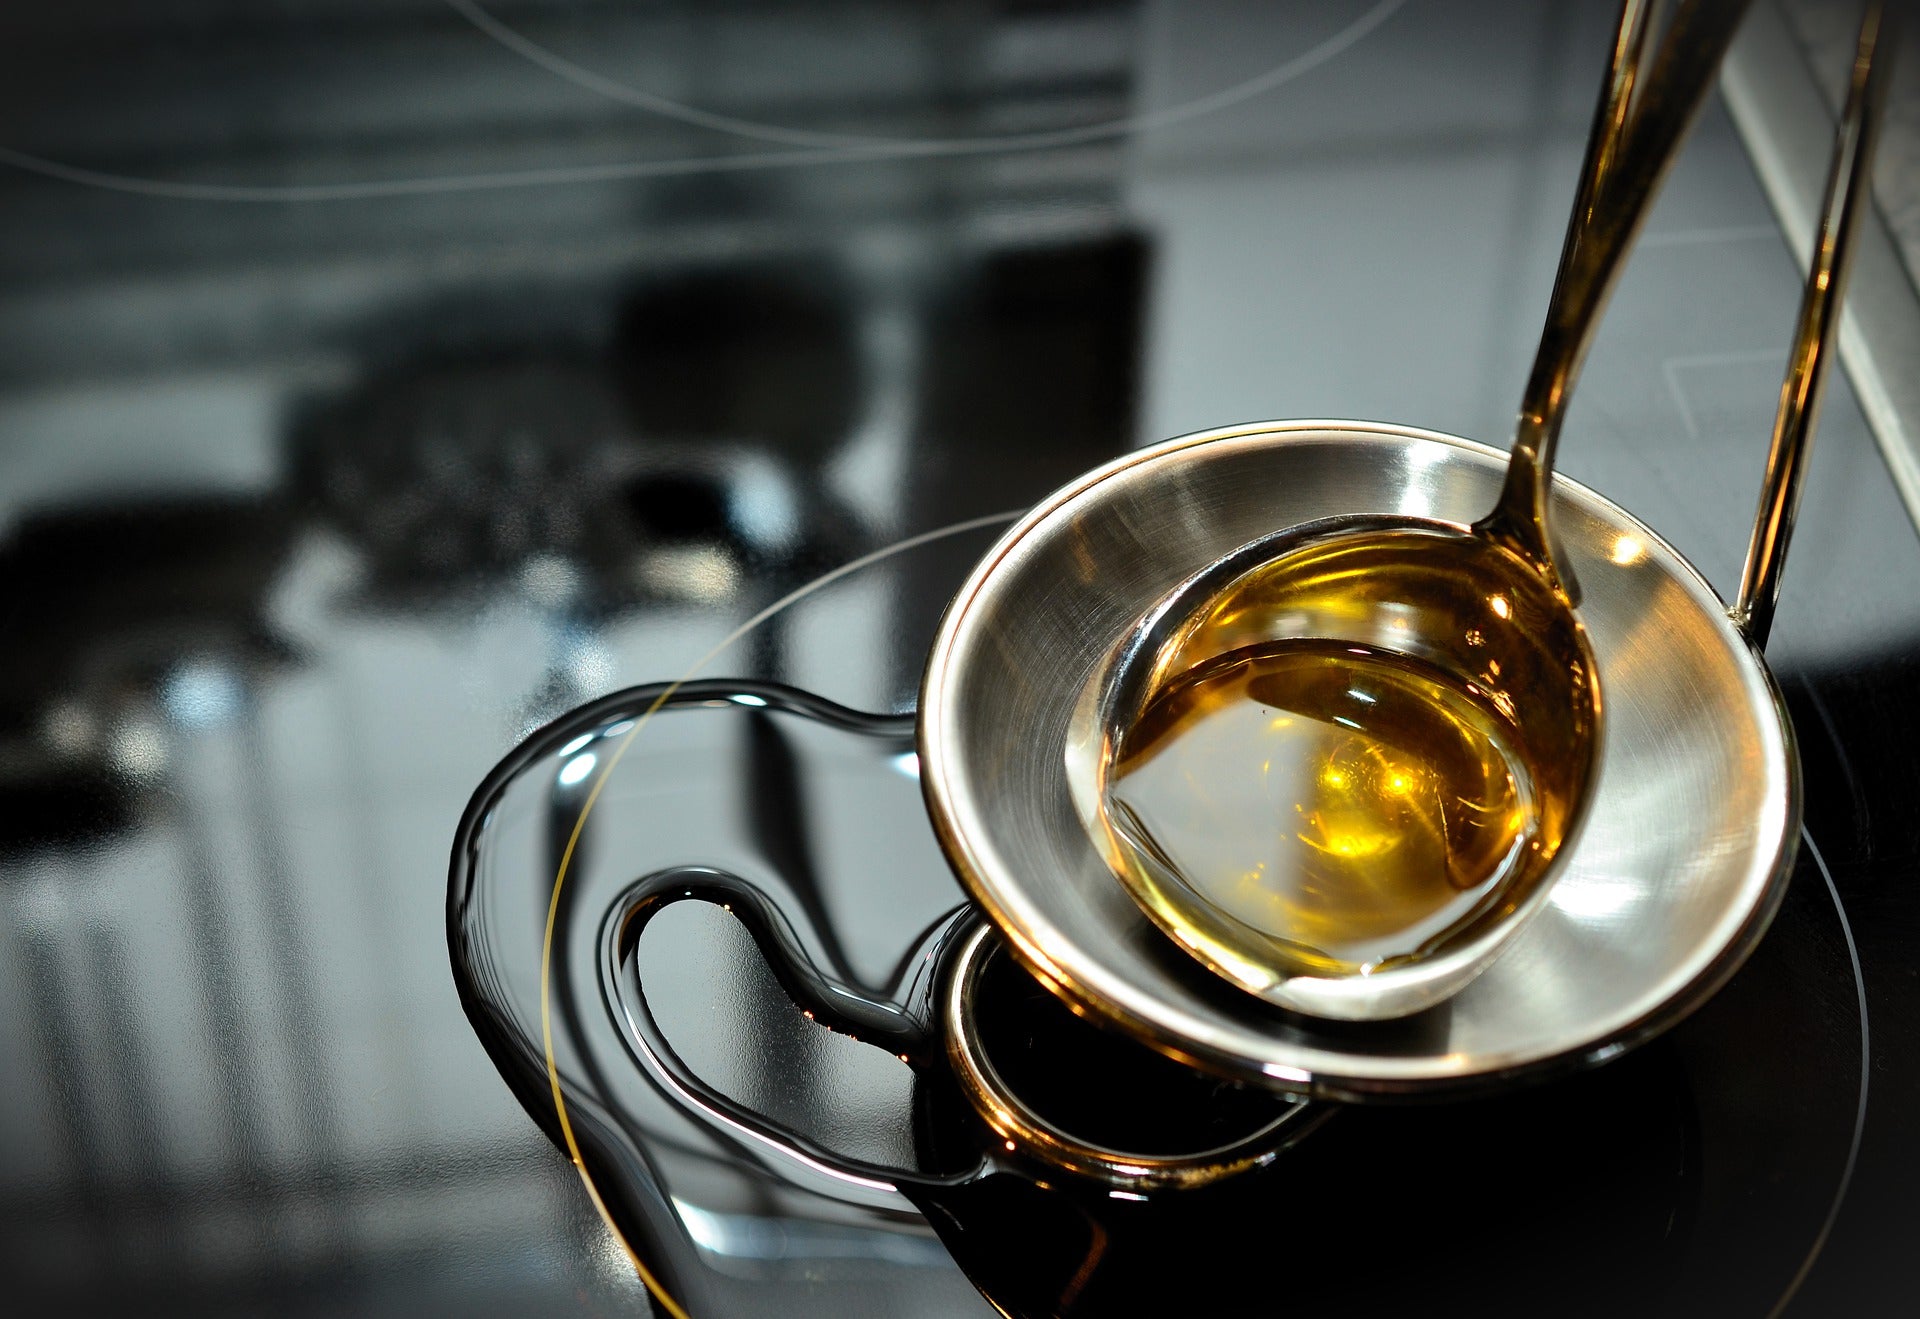 Canola Oil: Is It Harmful Or A Heart-Healthy Alternative To Olive Oil?